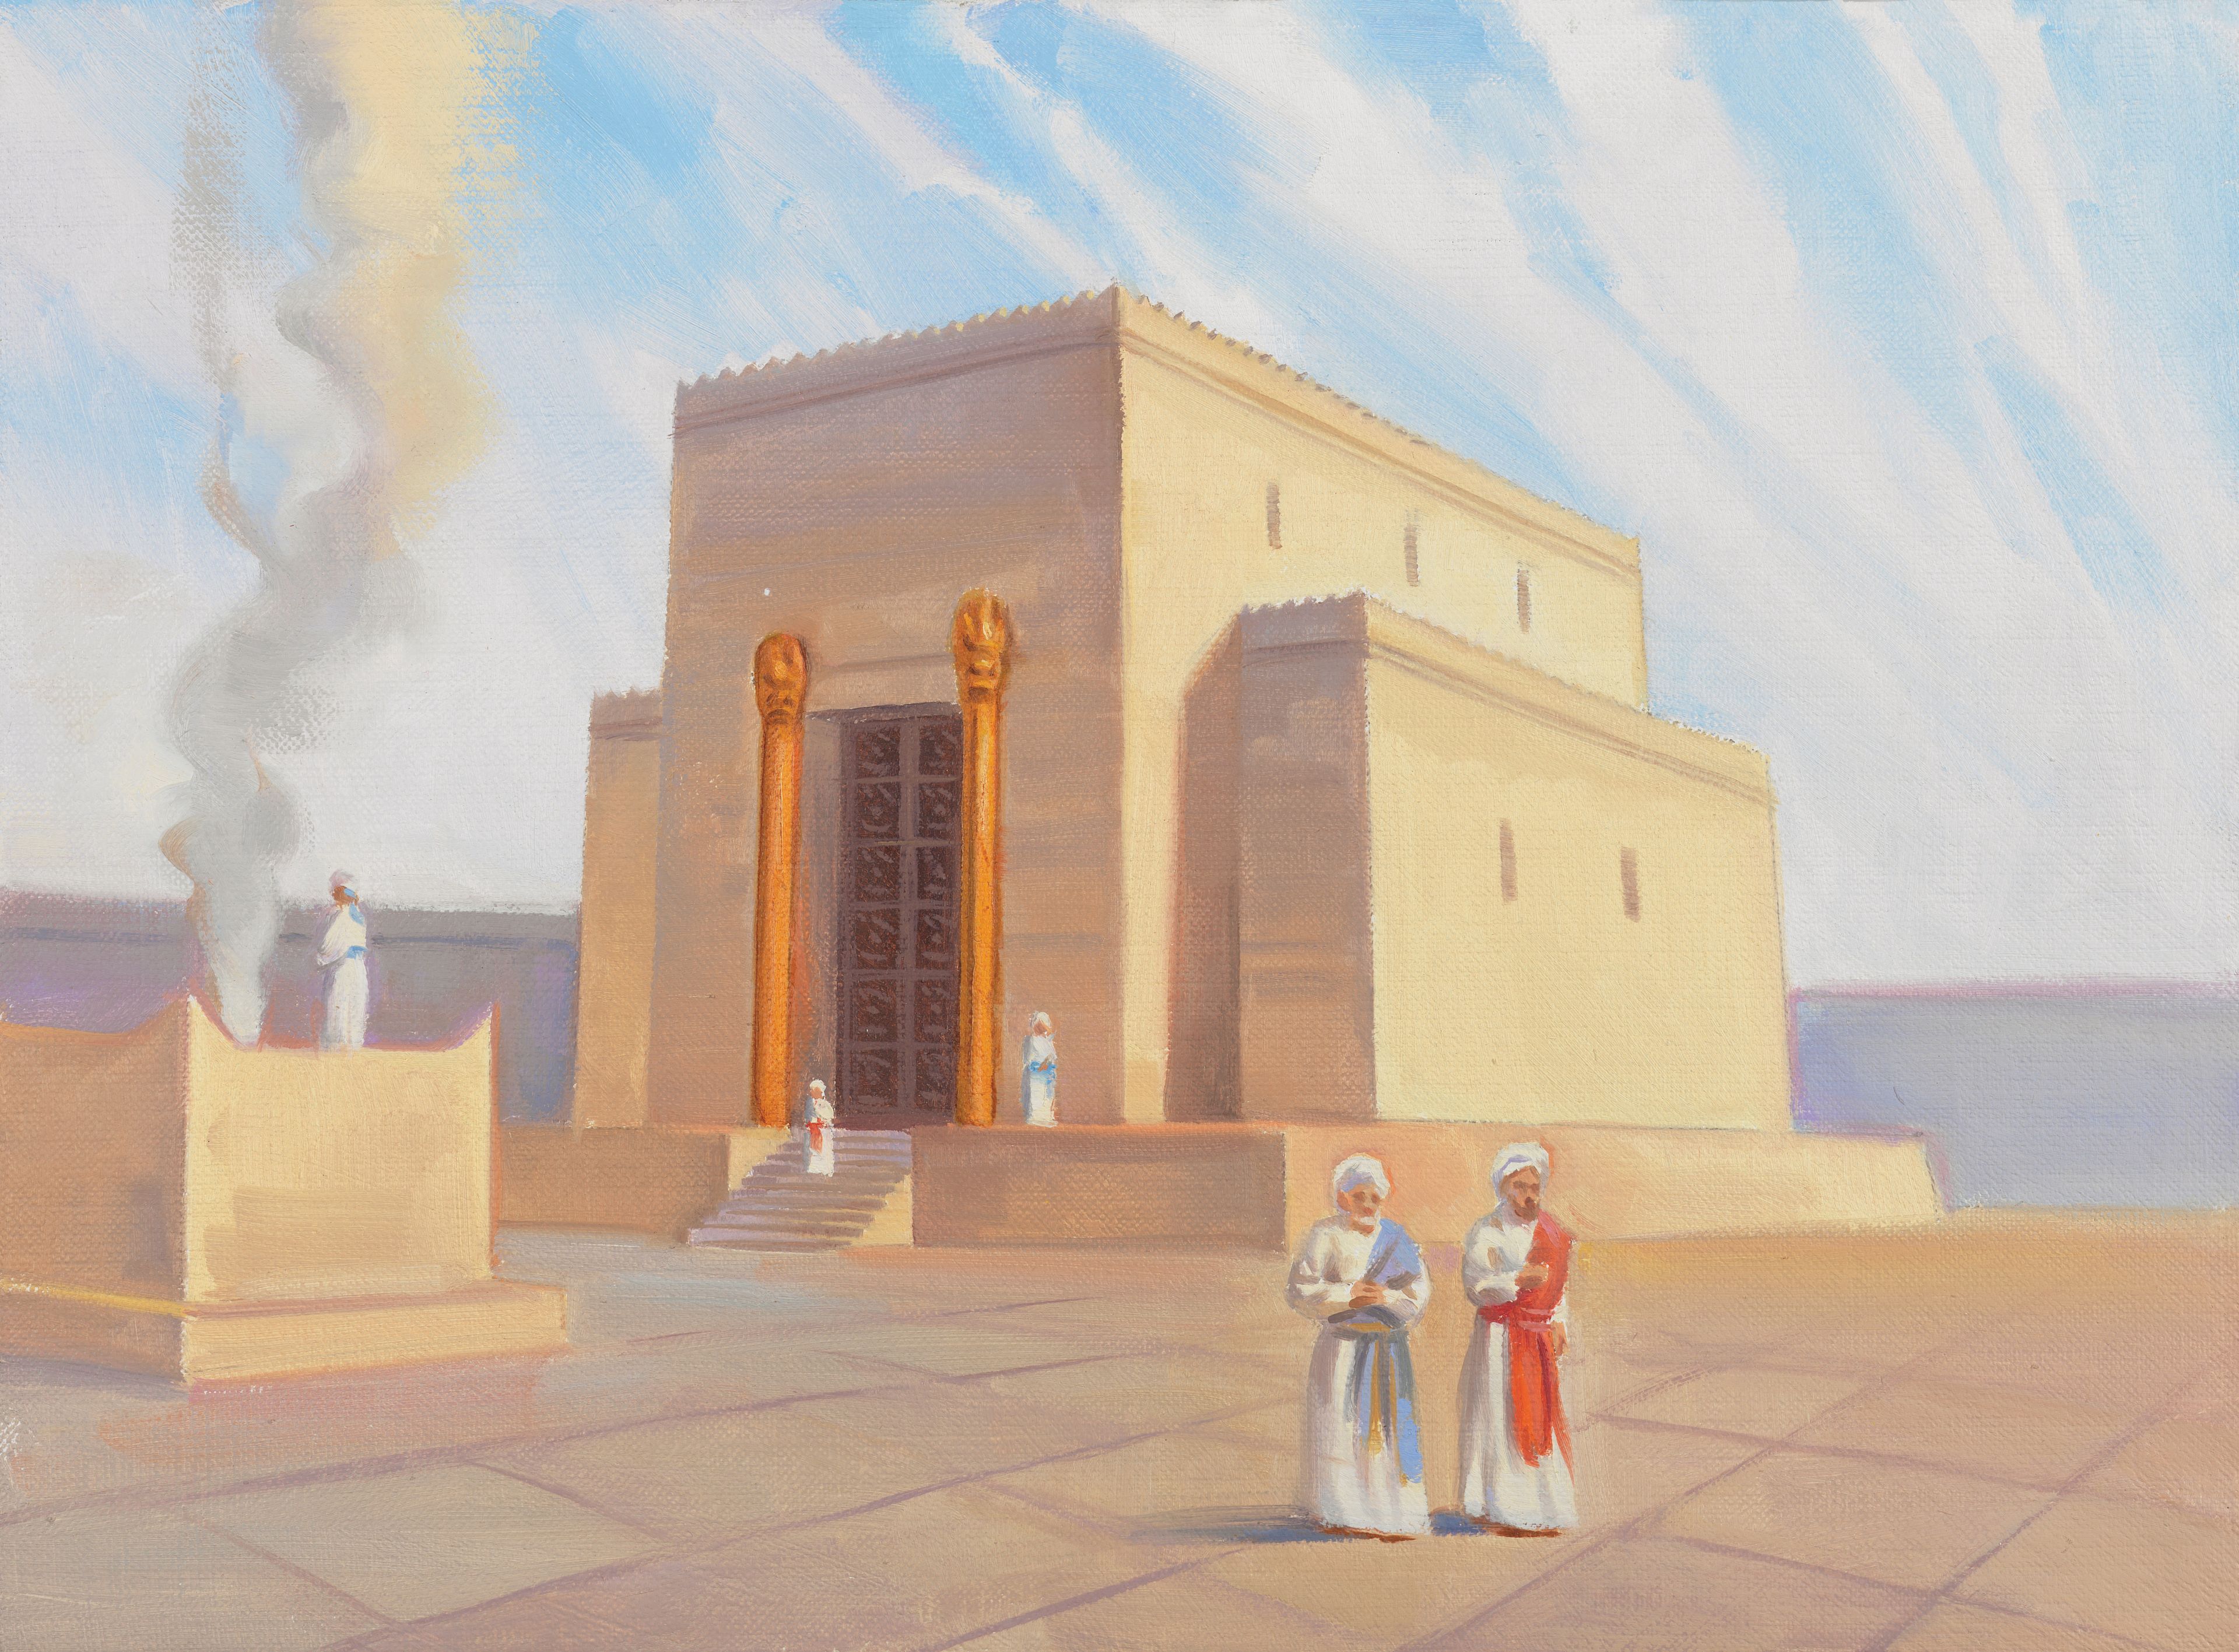 A depiction of Zerubbabel’s temple, by Sam Lawlor.